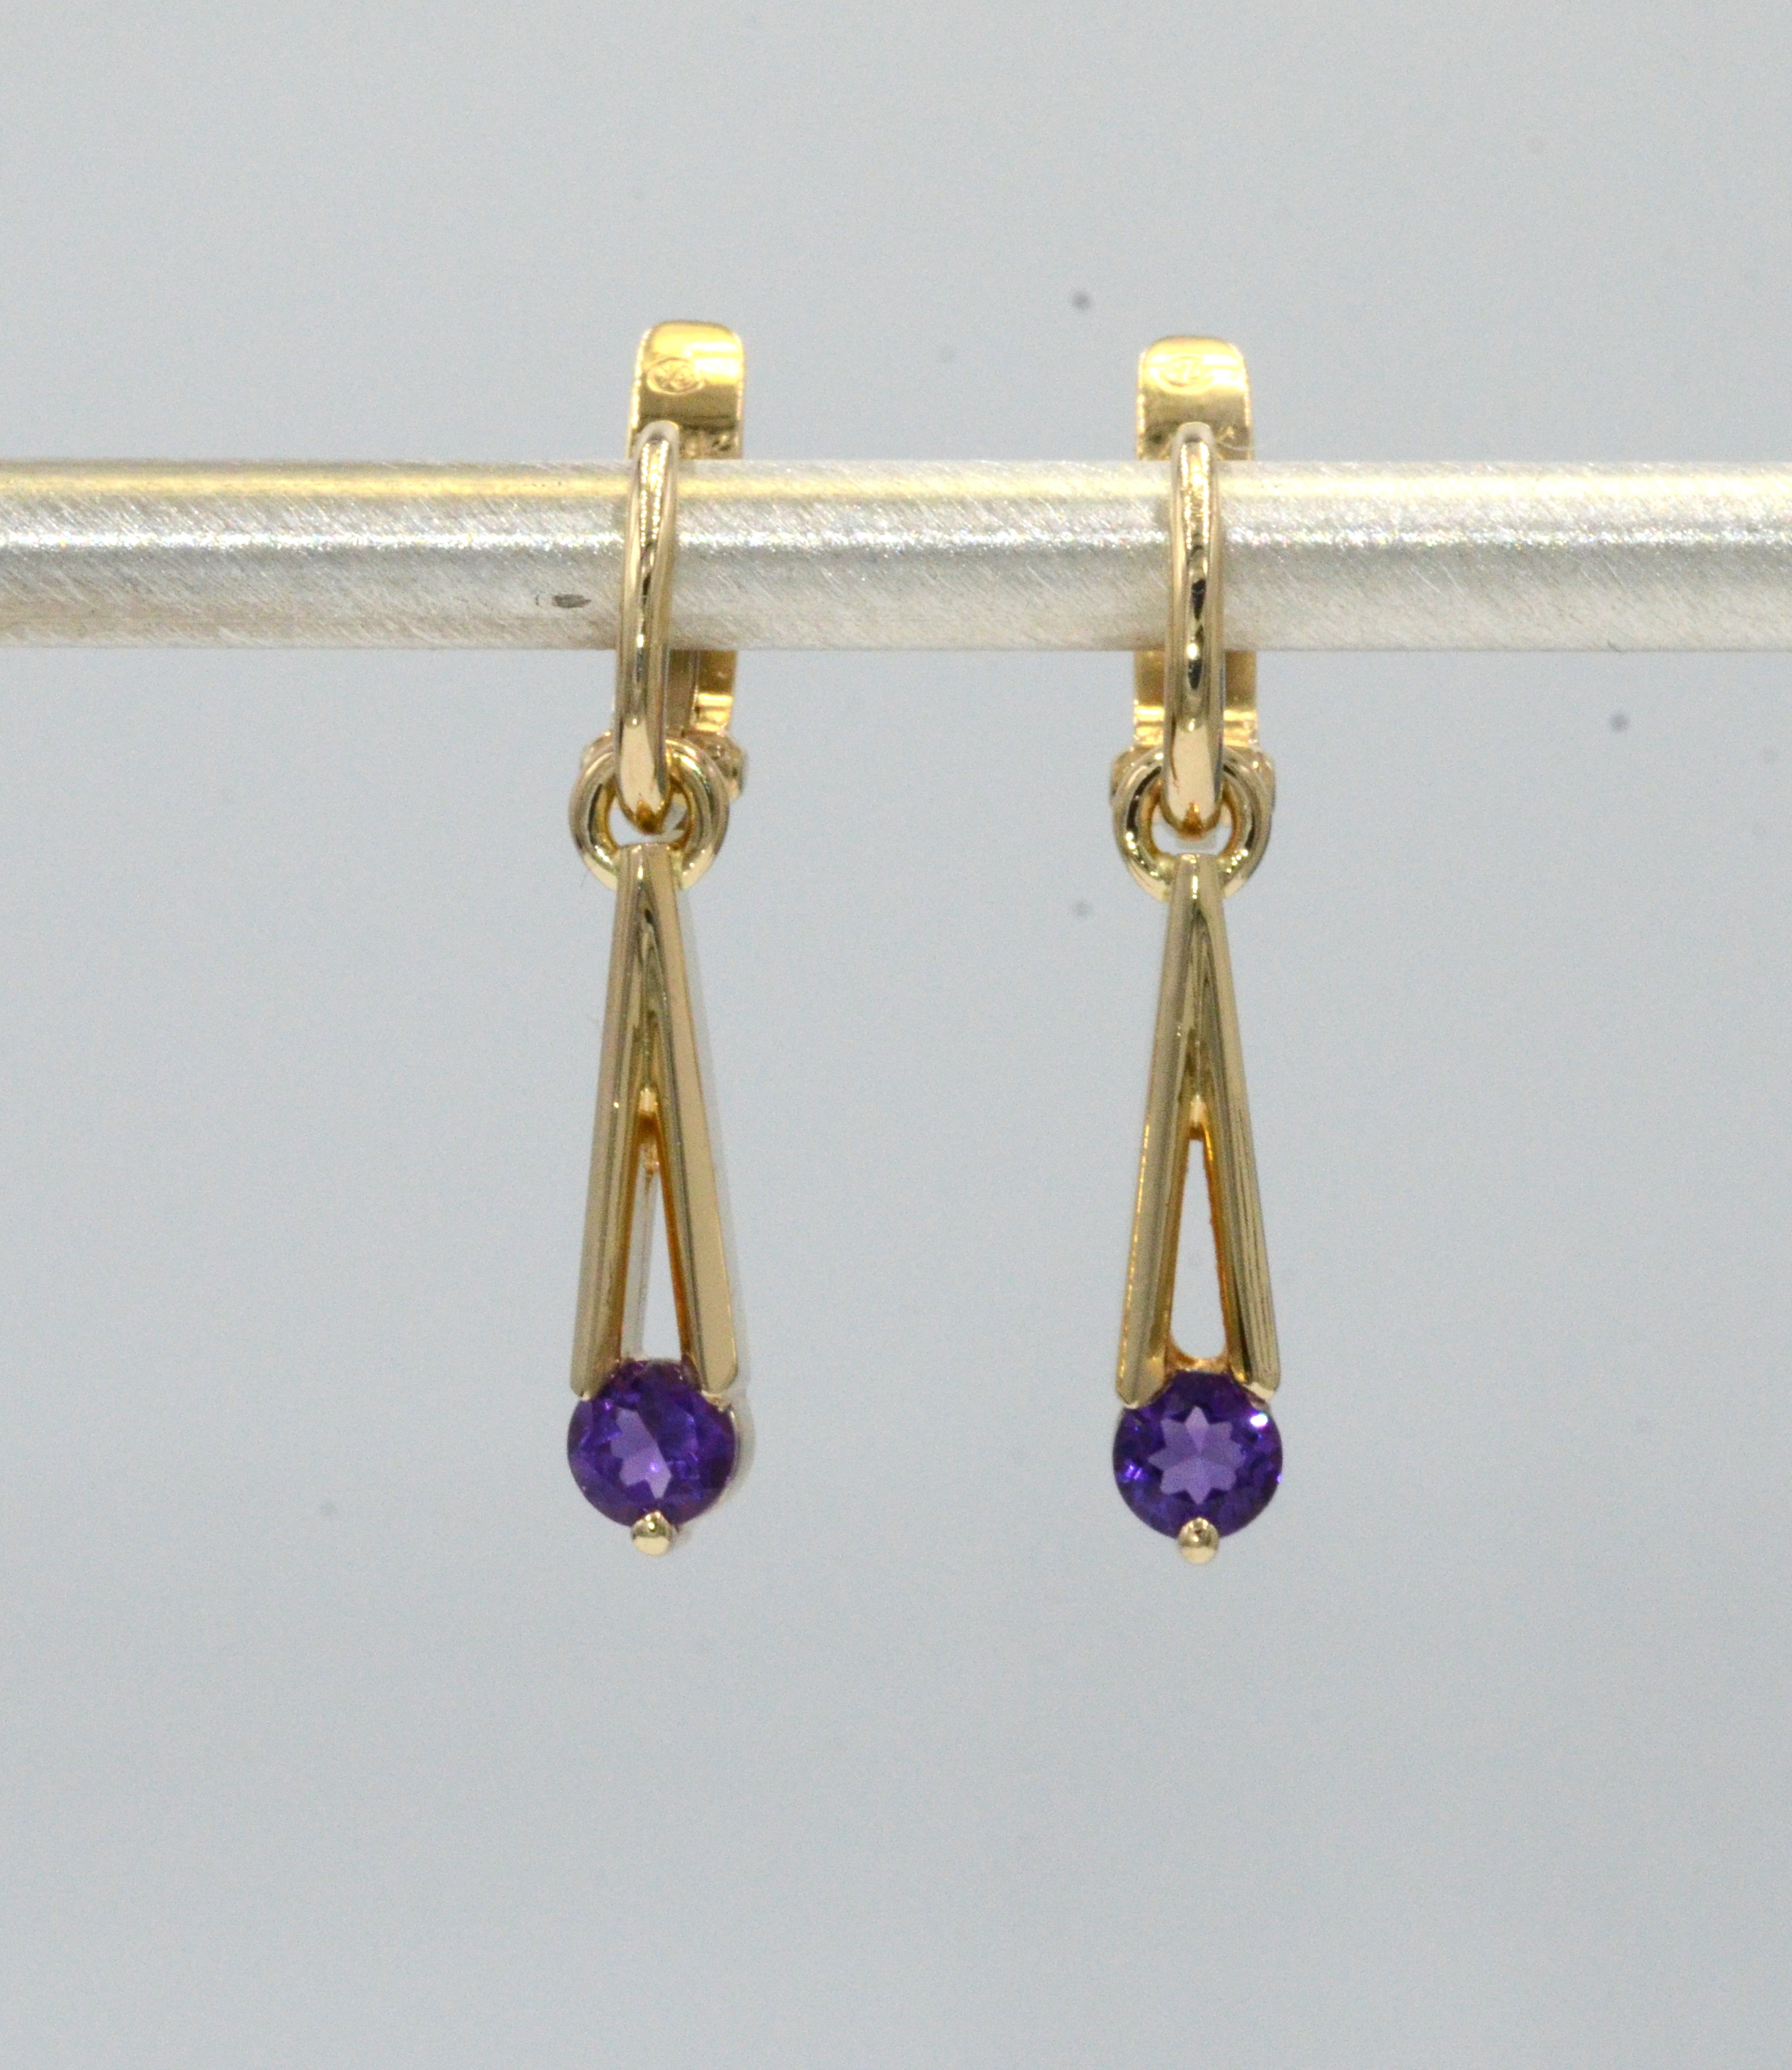 Tuning fork design Euro Charms with Amethyst Gemstone. 3/4 inch long. Euro Charm Earrings to be worn with our signature Euro Wires. Go to "About Store" for more information in regard to our Euro Wires.